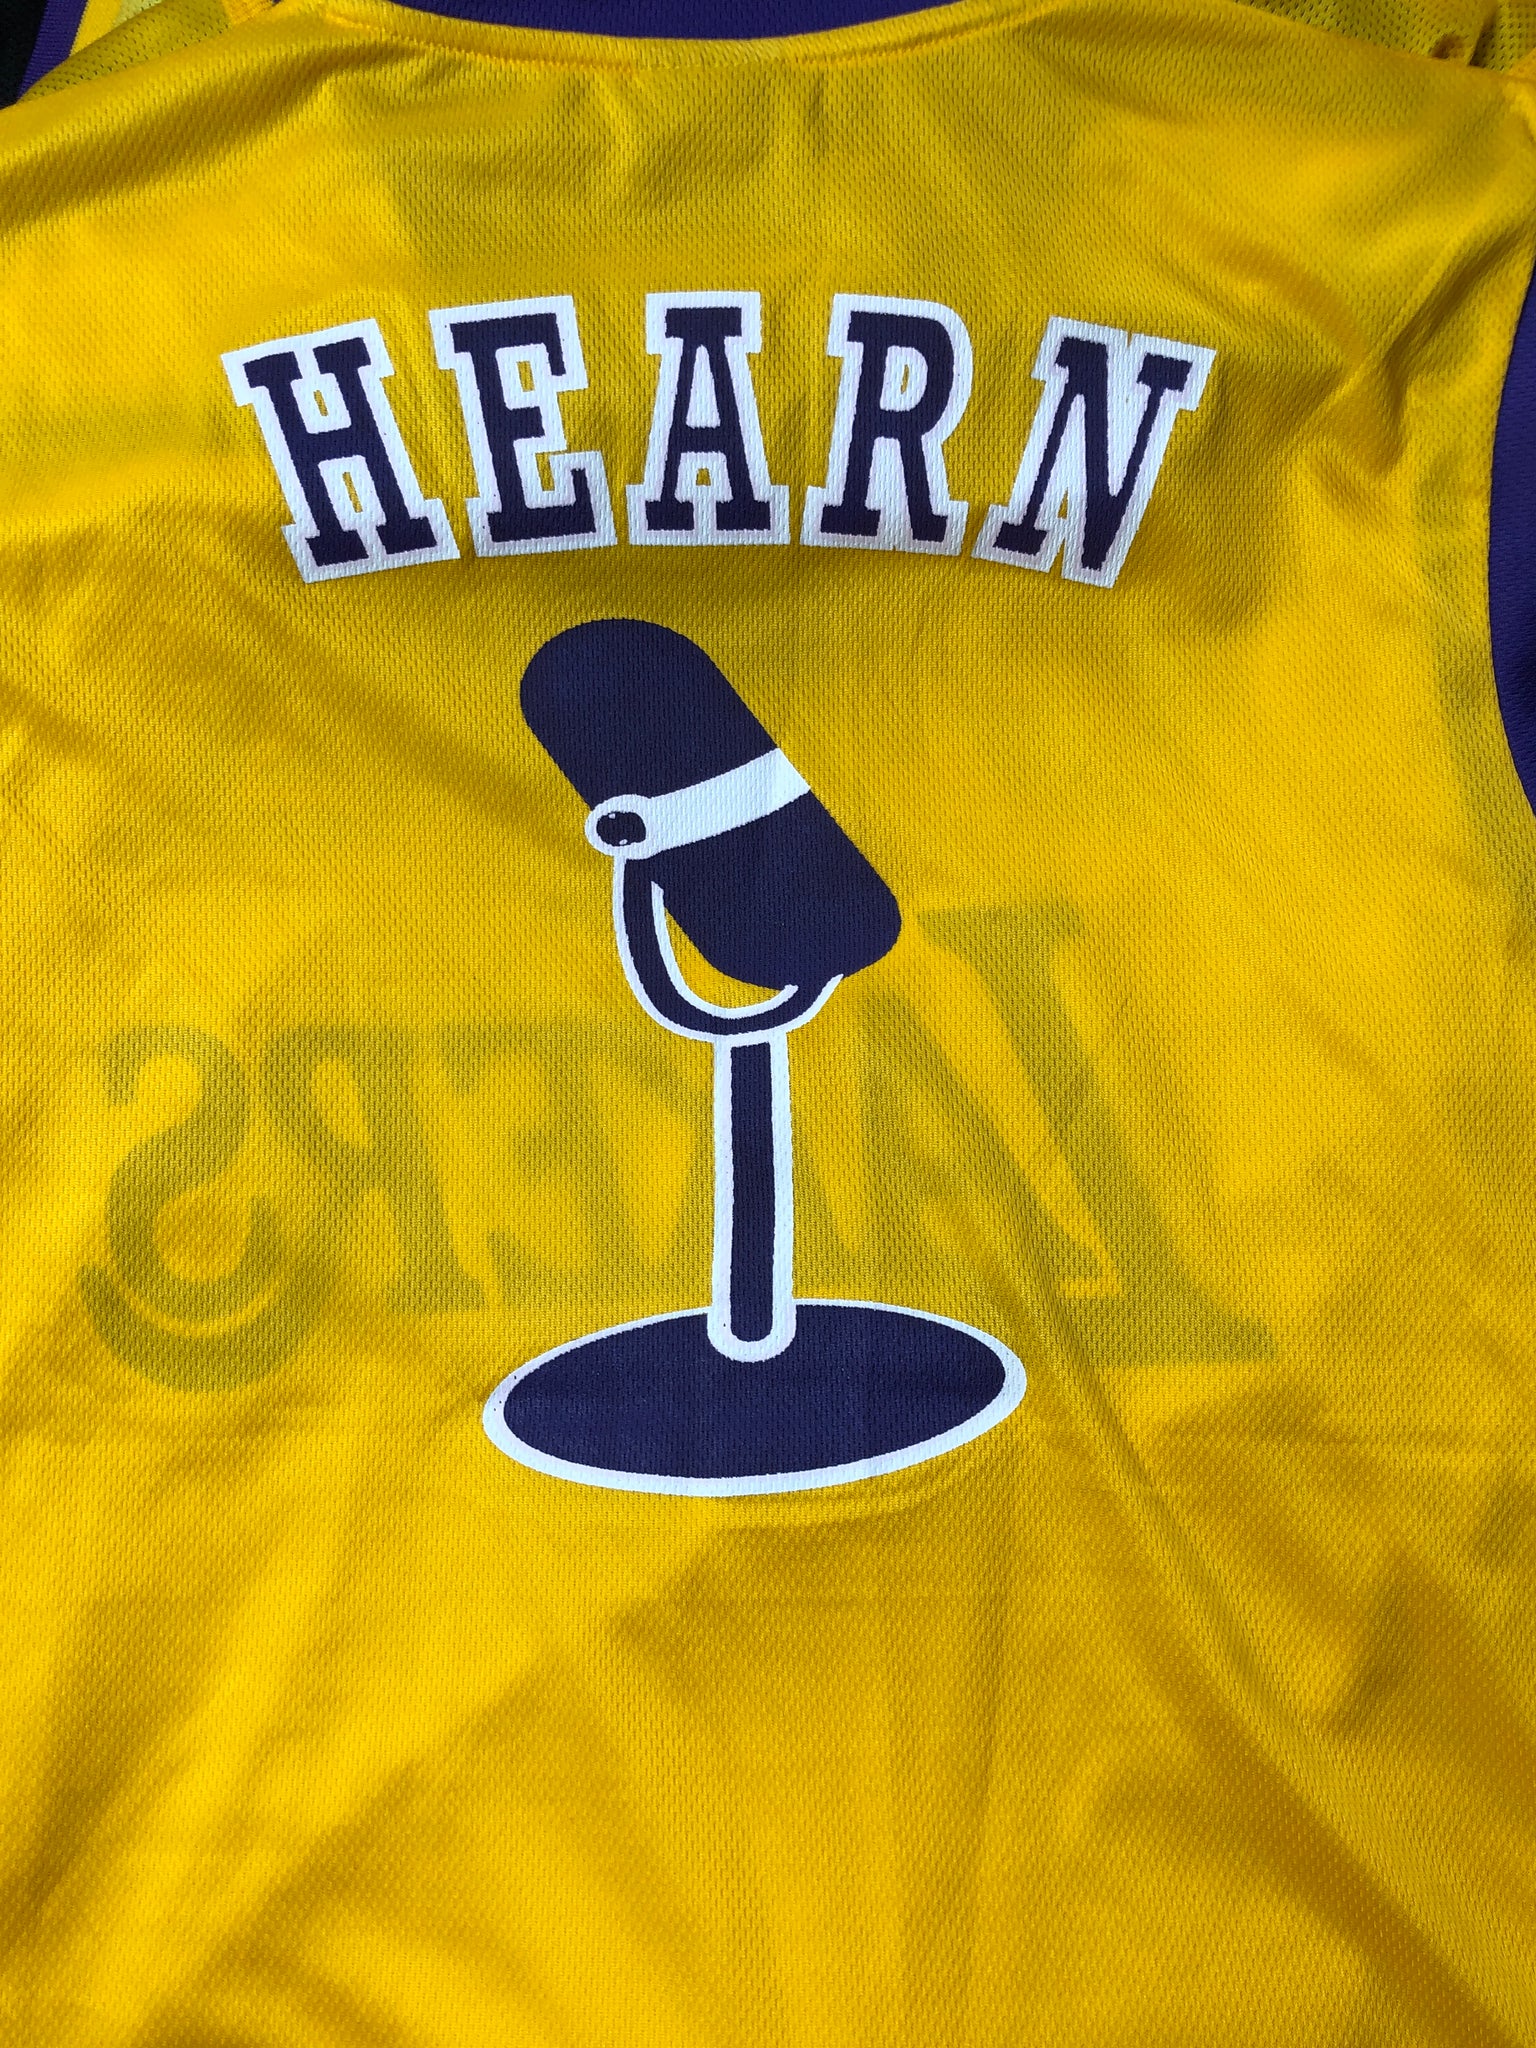 Los Angeles Lakers Chick Hearn Jersey 